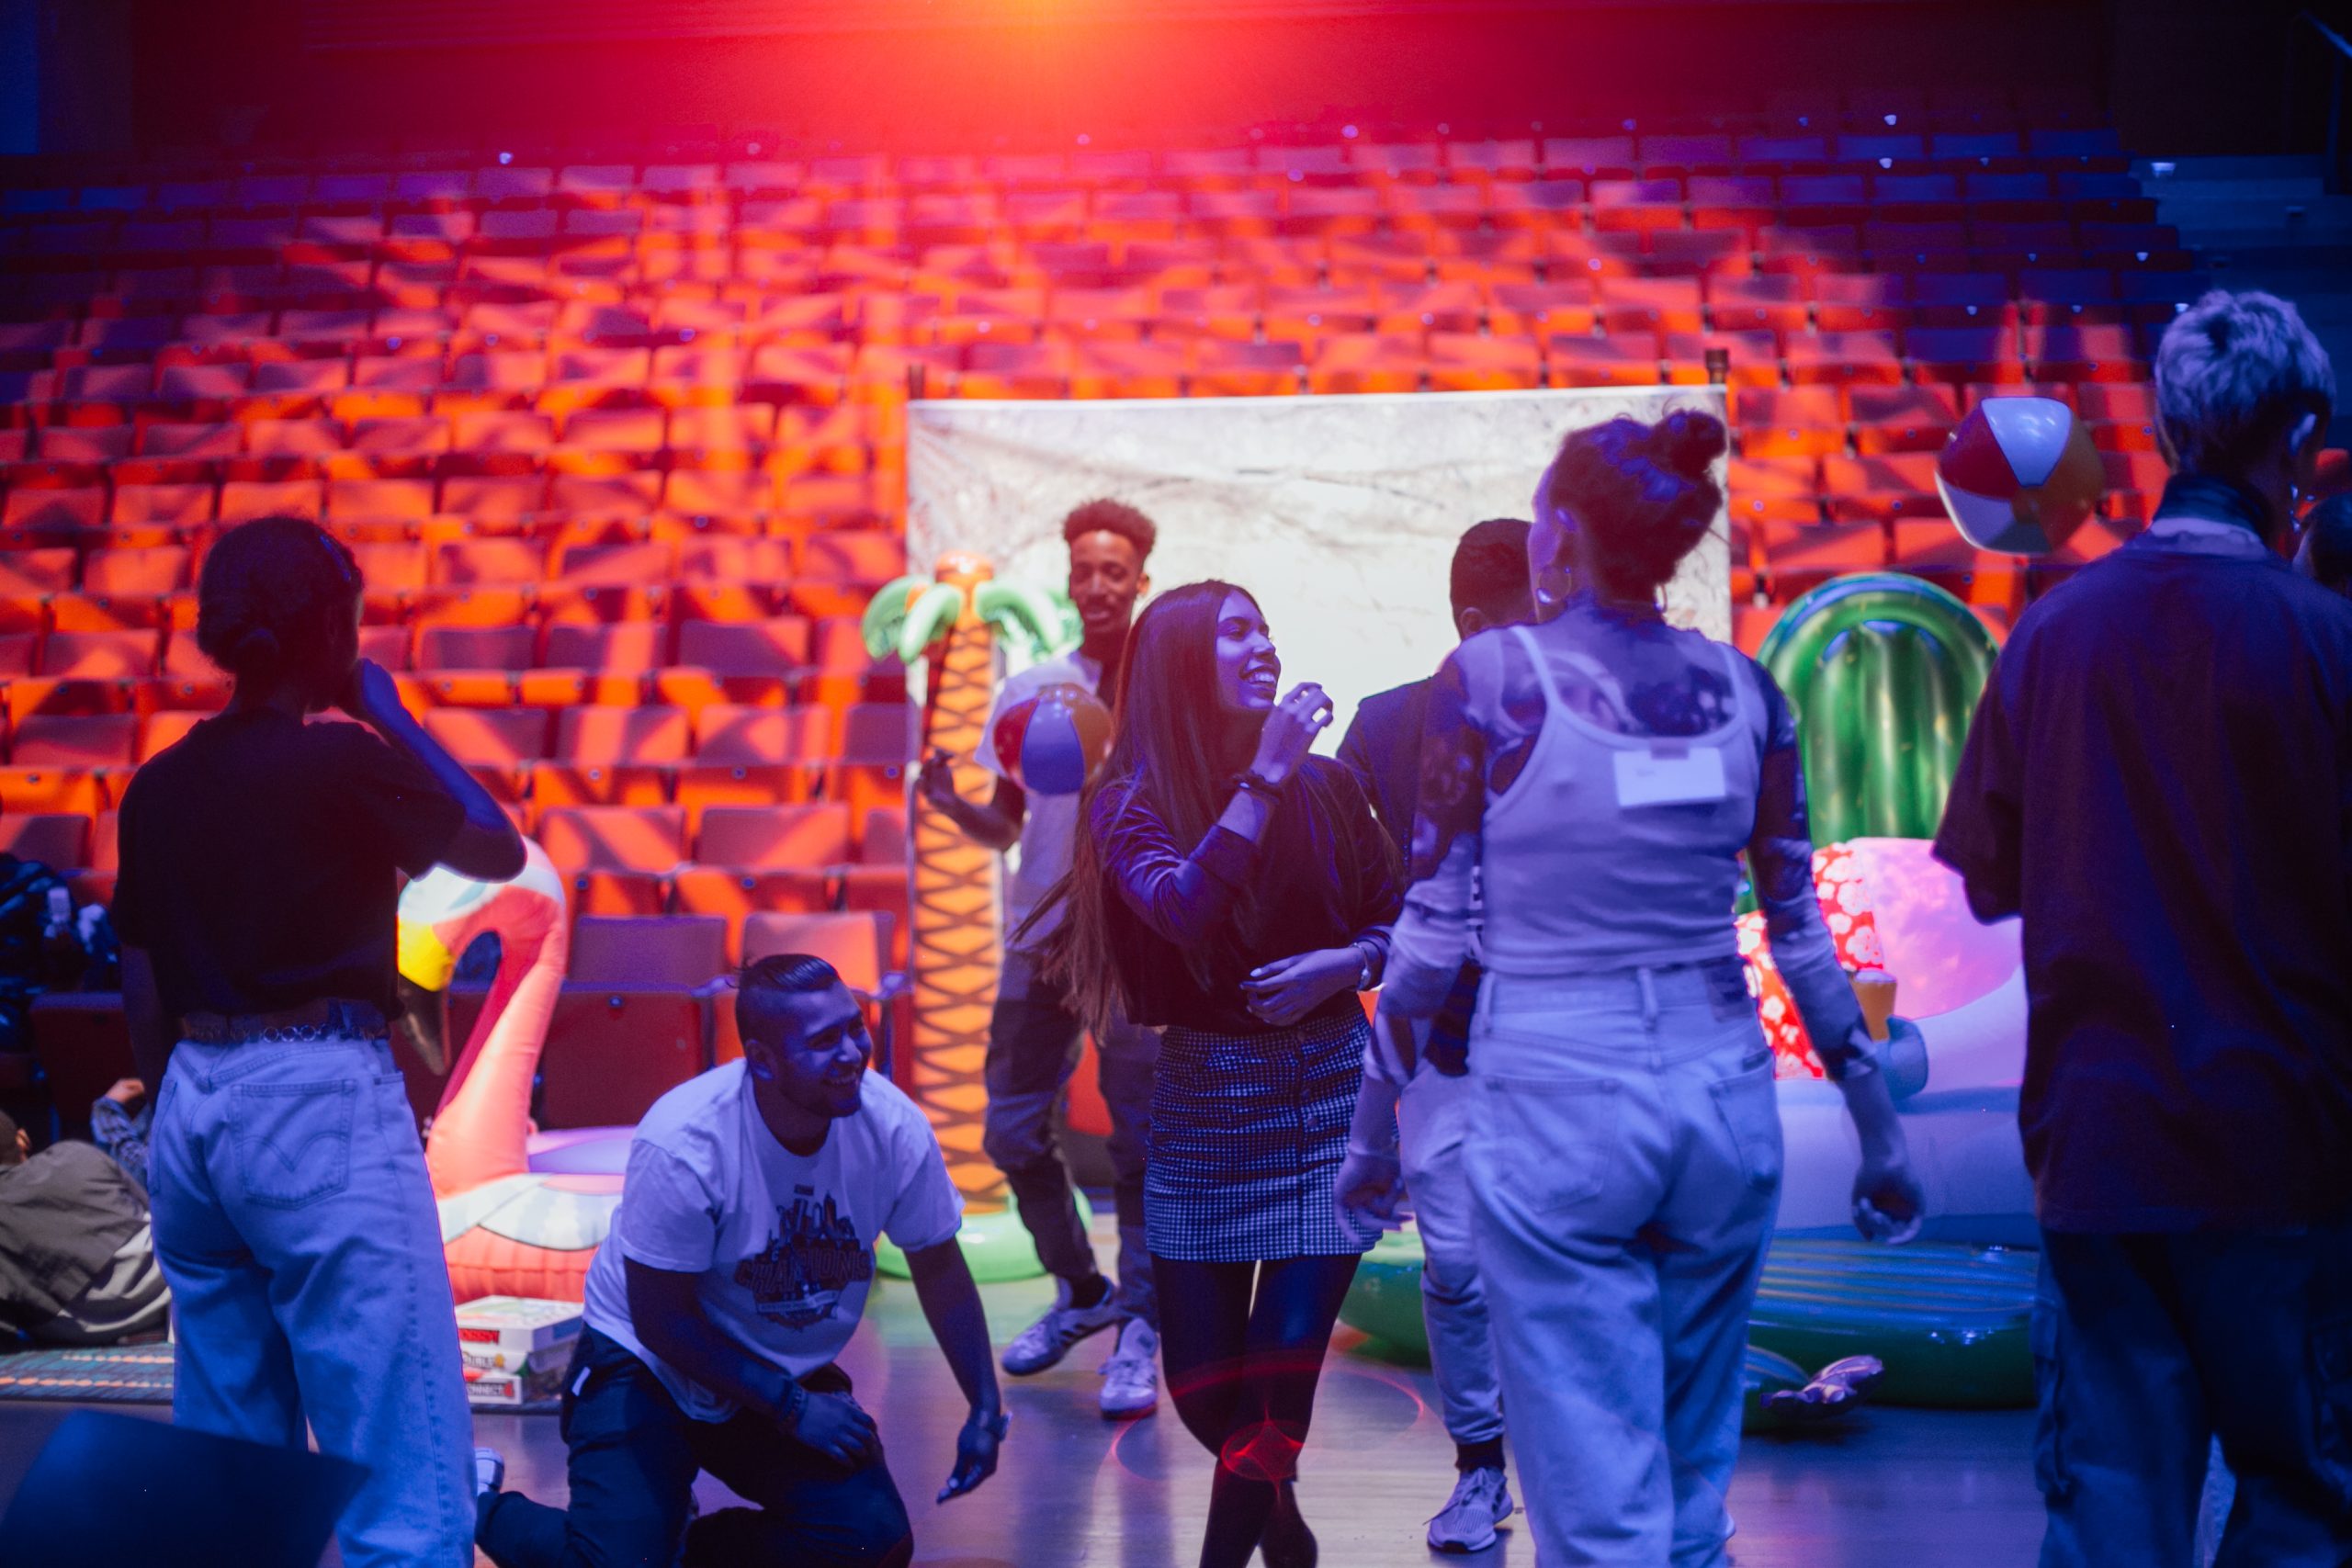 A group of teenagers socialize at the floor of a theatre, standing in front of a photoshoot display with tropical-themed props.